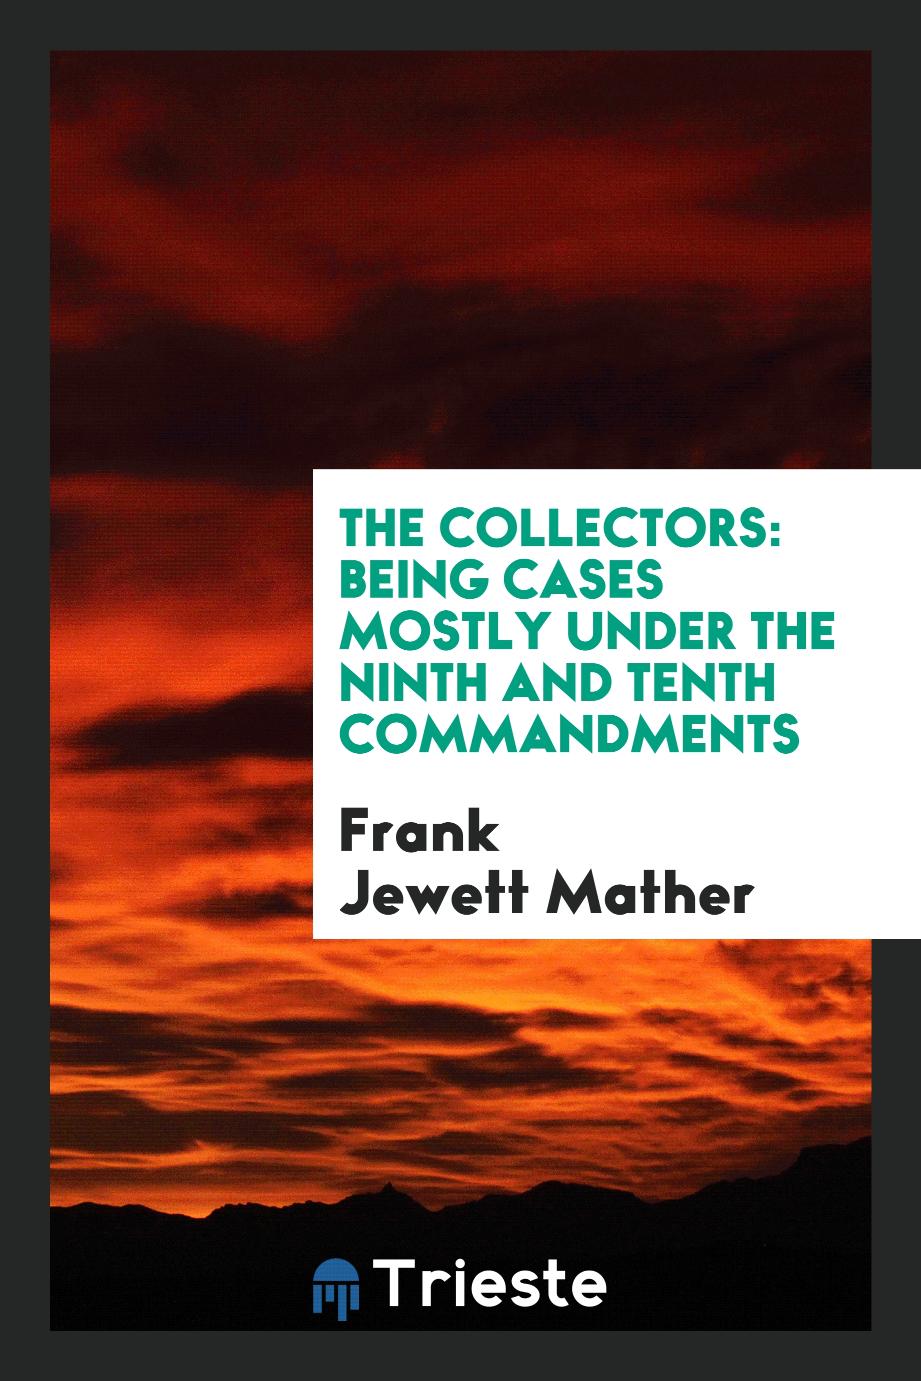 The collectors: being cases mostly under the ninth and tenth commandments